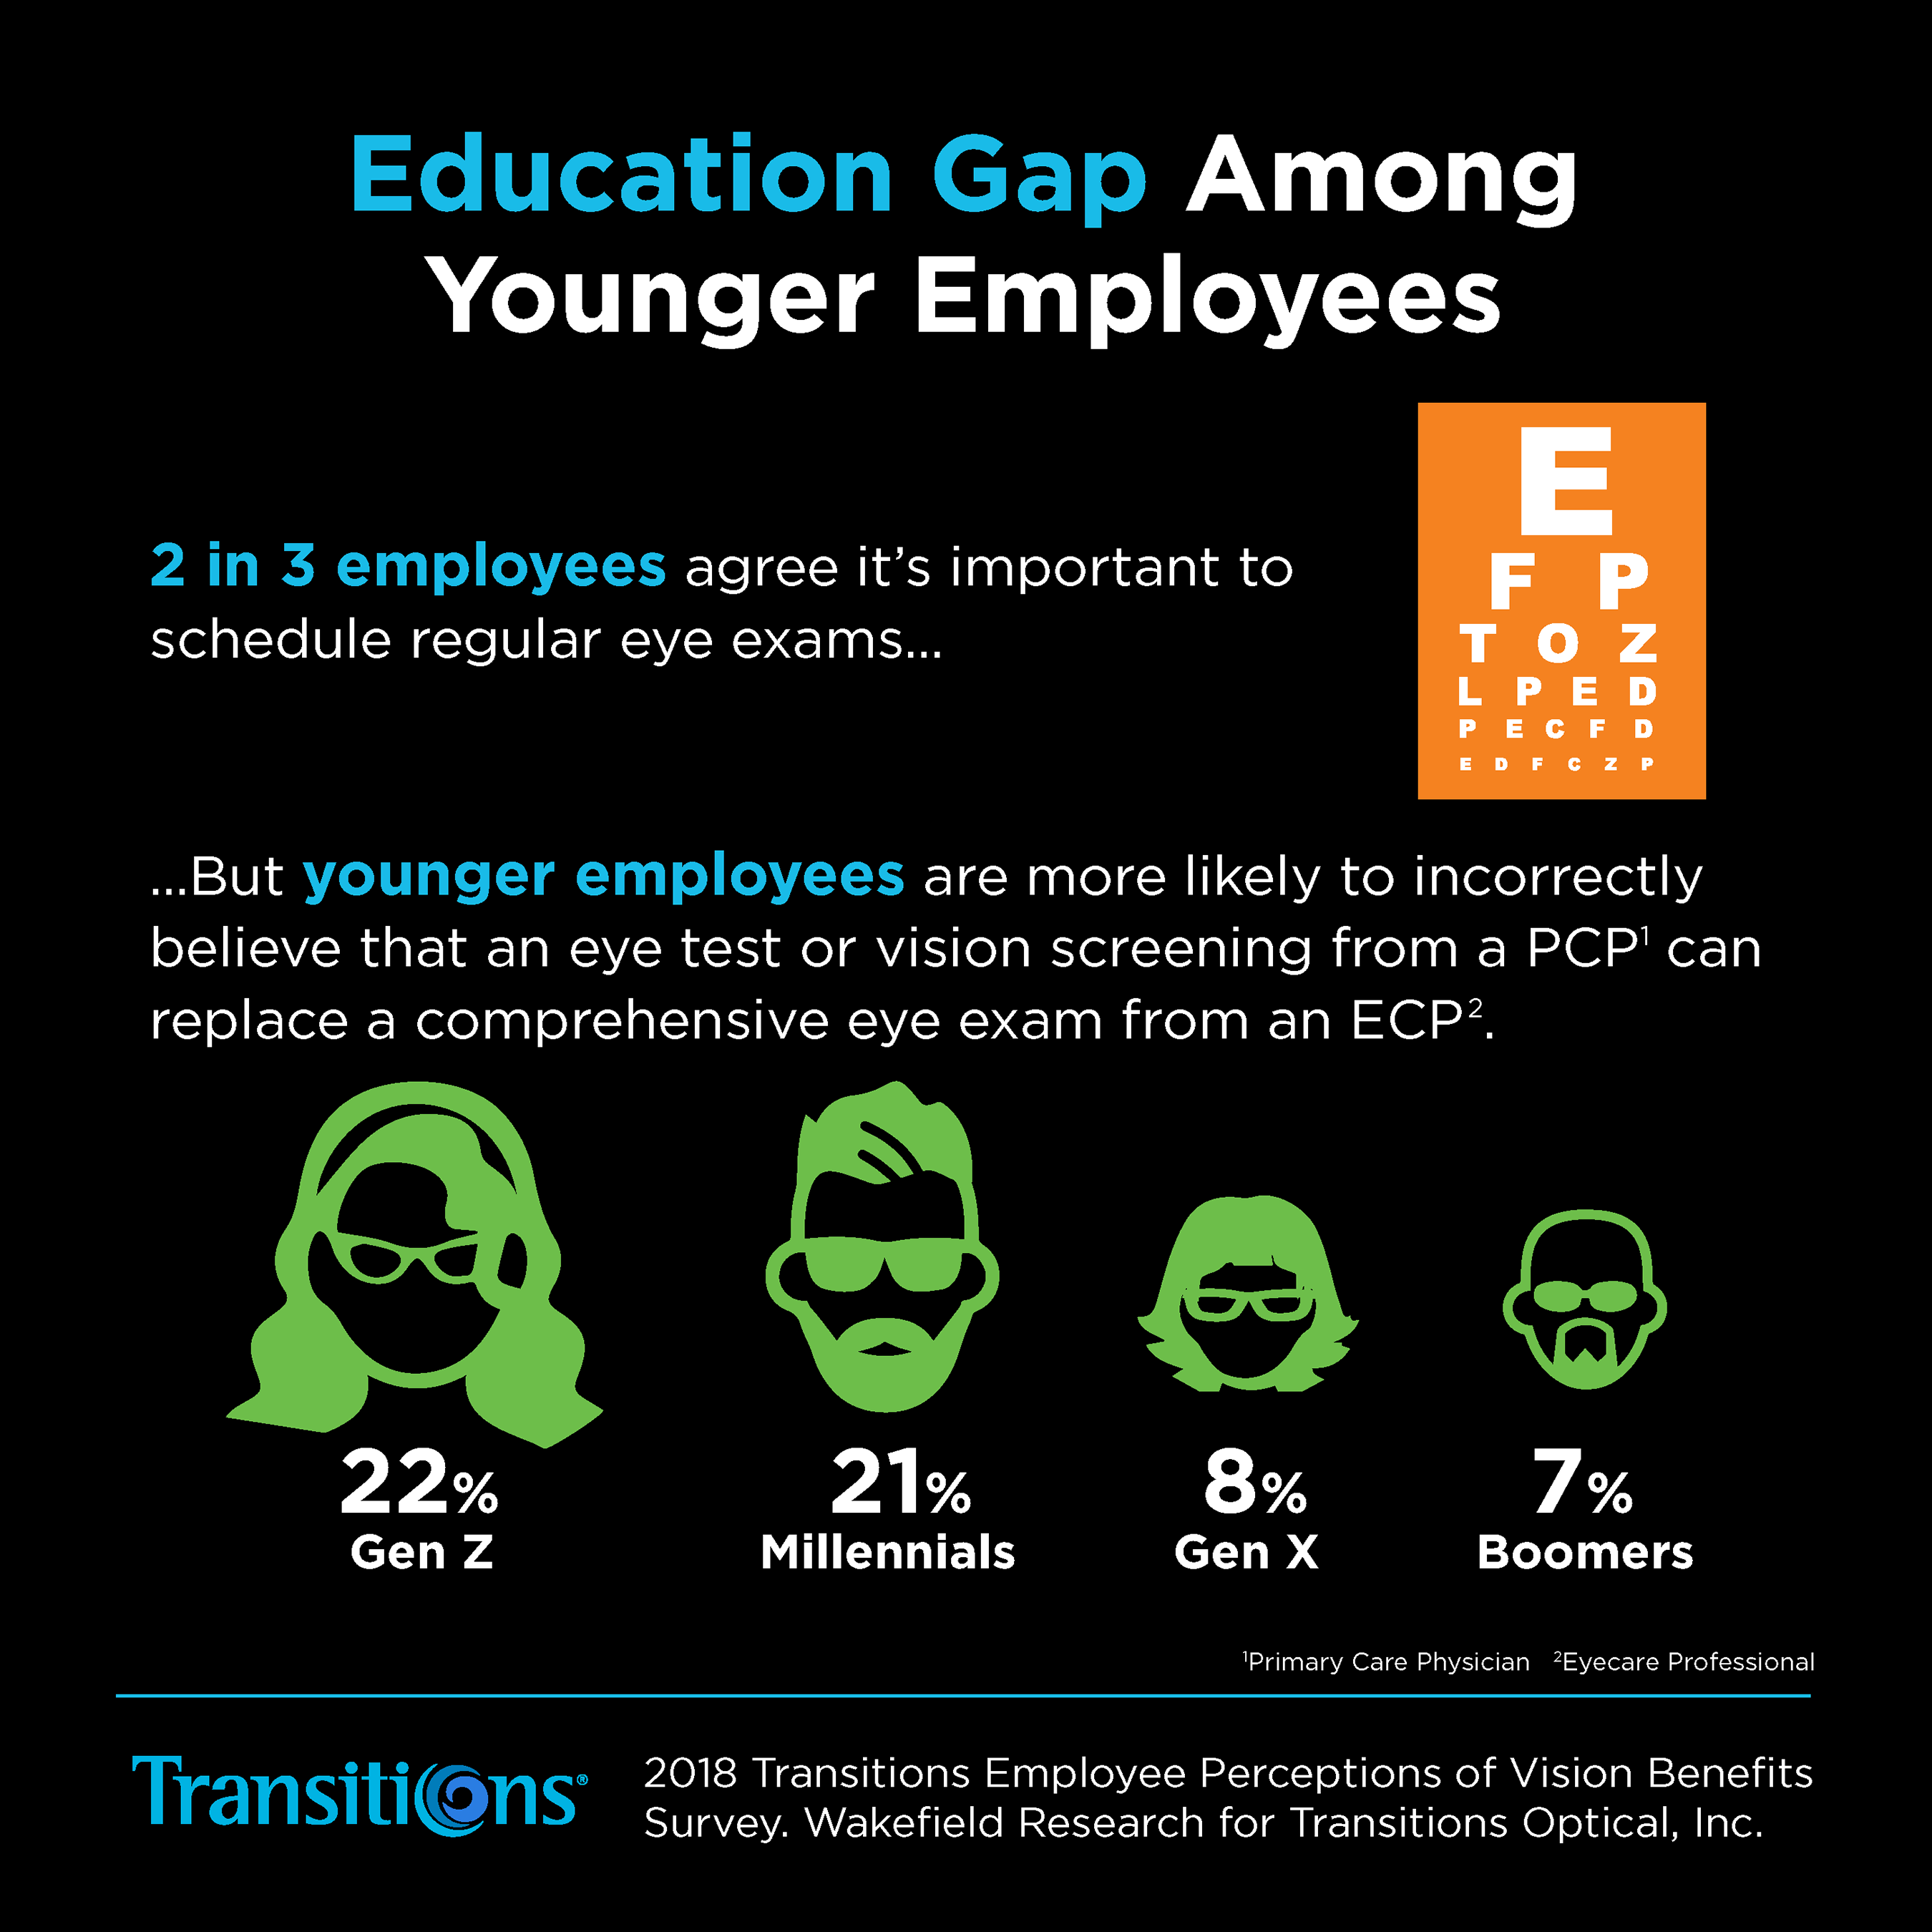 Younger employees are more likely to incorrectly believe that an eye test or vision screening from a Primary Care Physician can replace a comprehensive eye exam from an Eyecare Professional, according to Transitions Optical Survey.